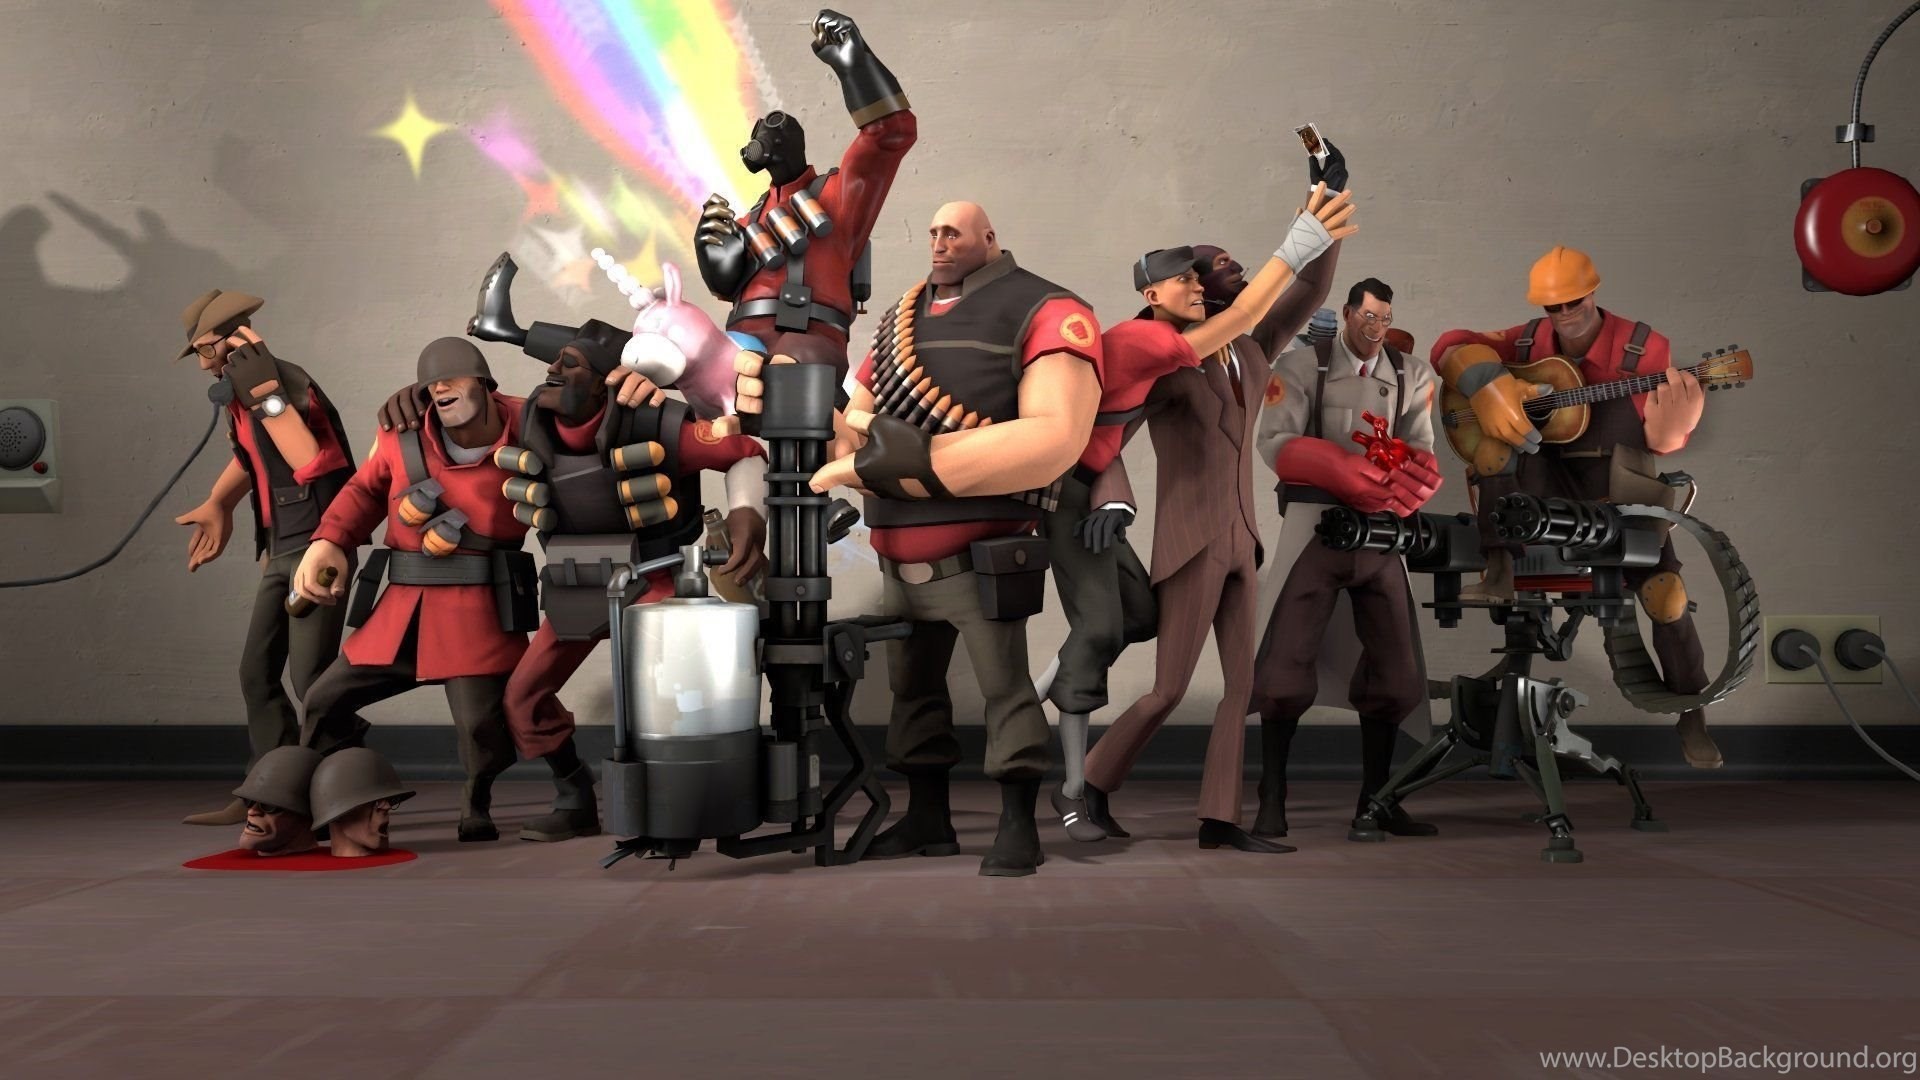 1920x1080 330 Team Fortress 2 Hd Wallpapers Backgrounds Wallpaper Abyss